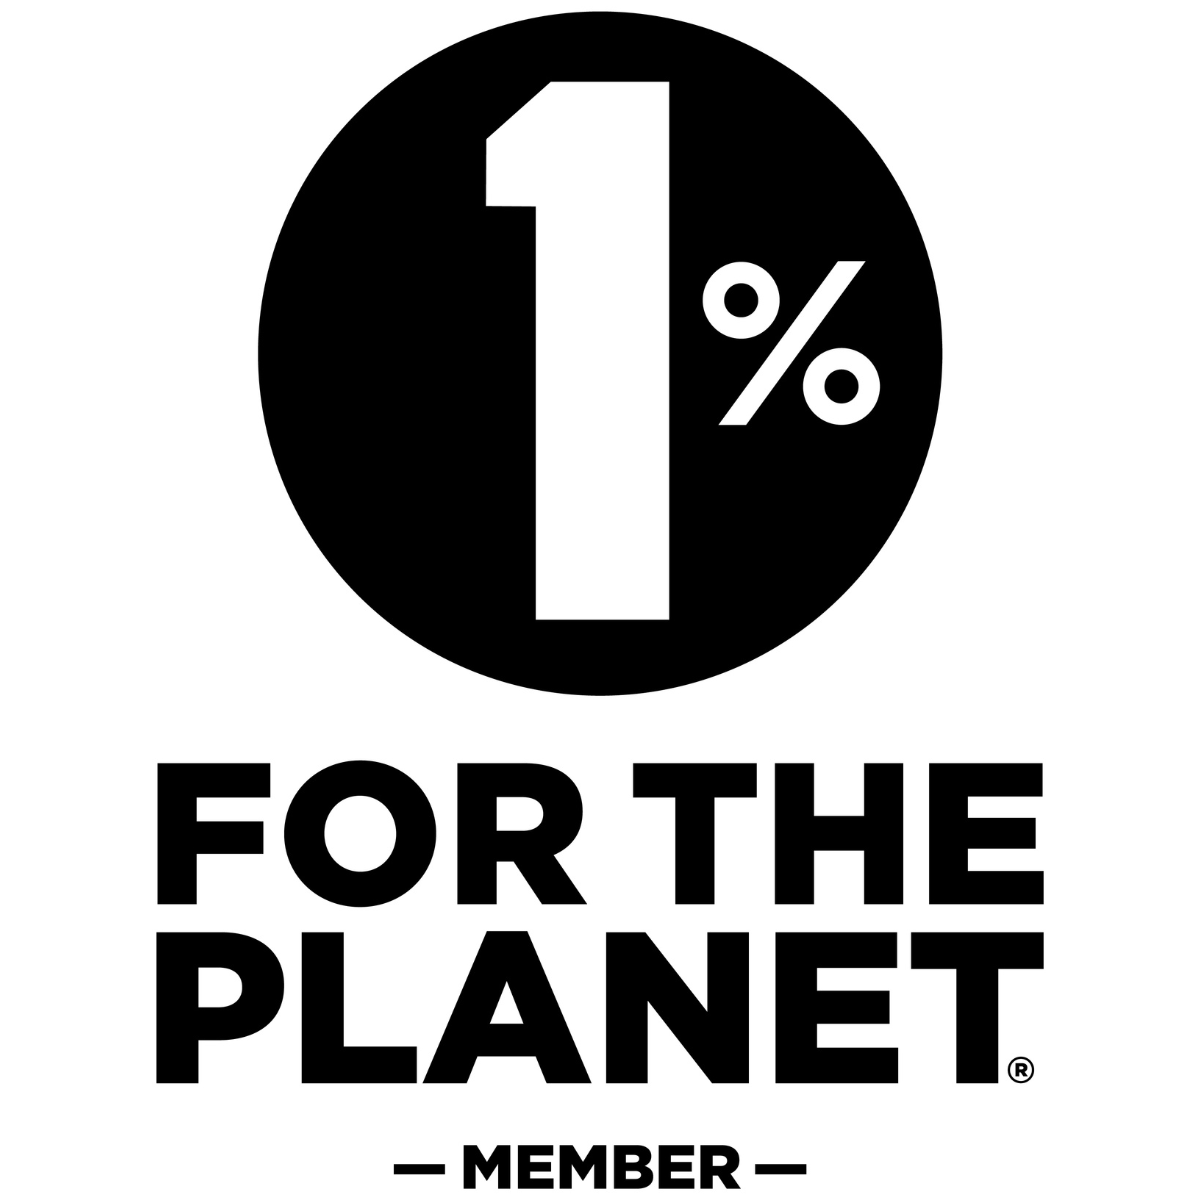 1% for the Planet logo - a green circle with white text reading '1% for the planet' and an arrow pointing up, representing sustainable giving and environmental stewardship.